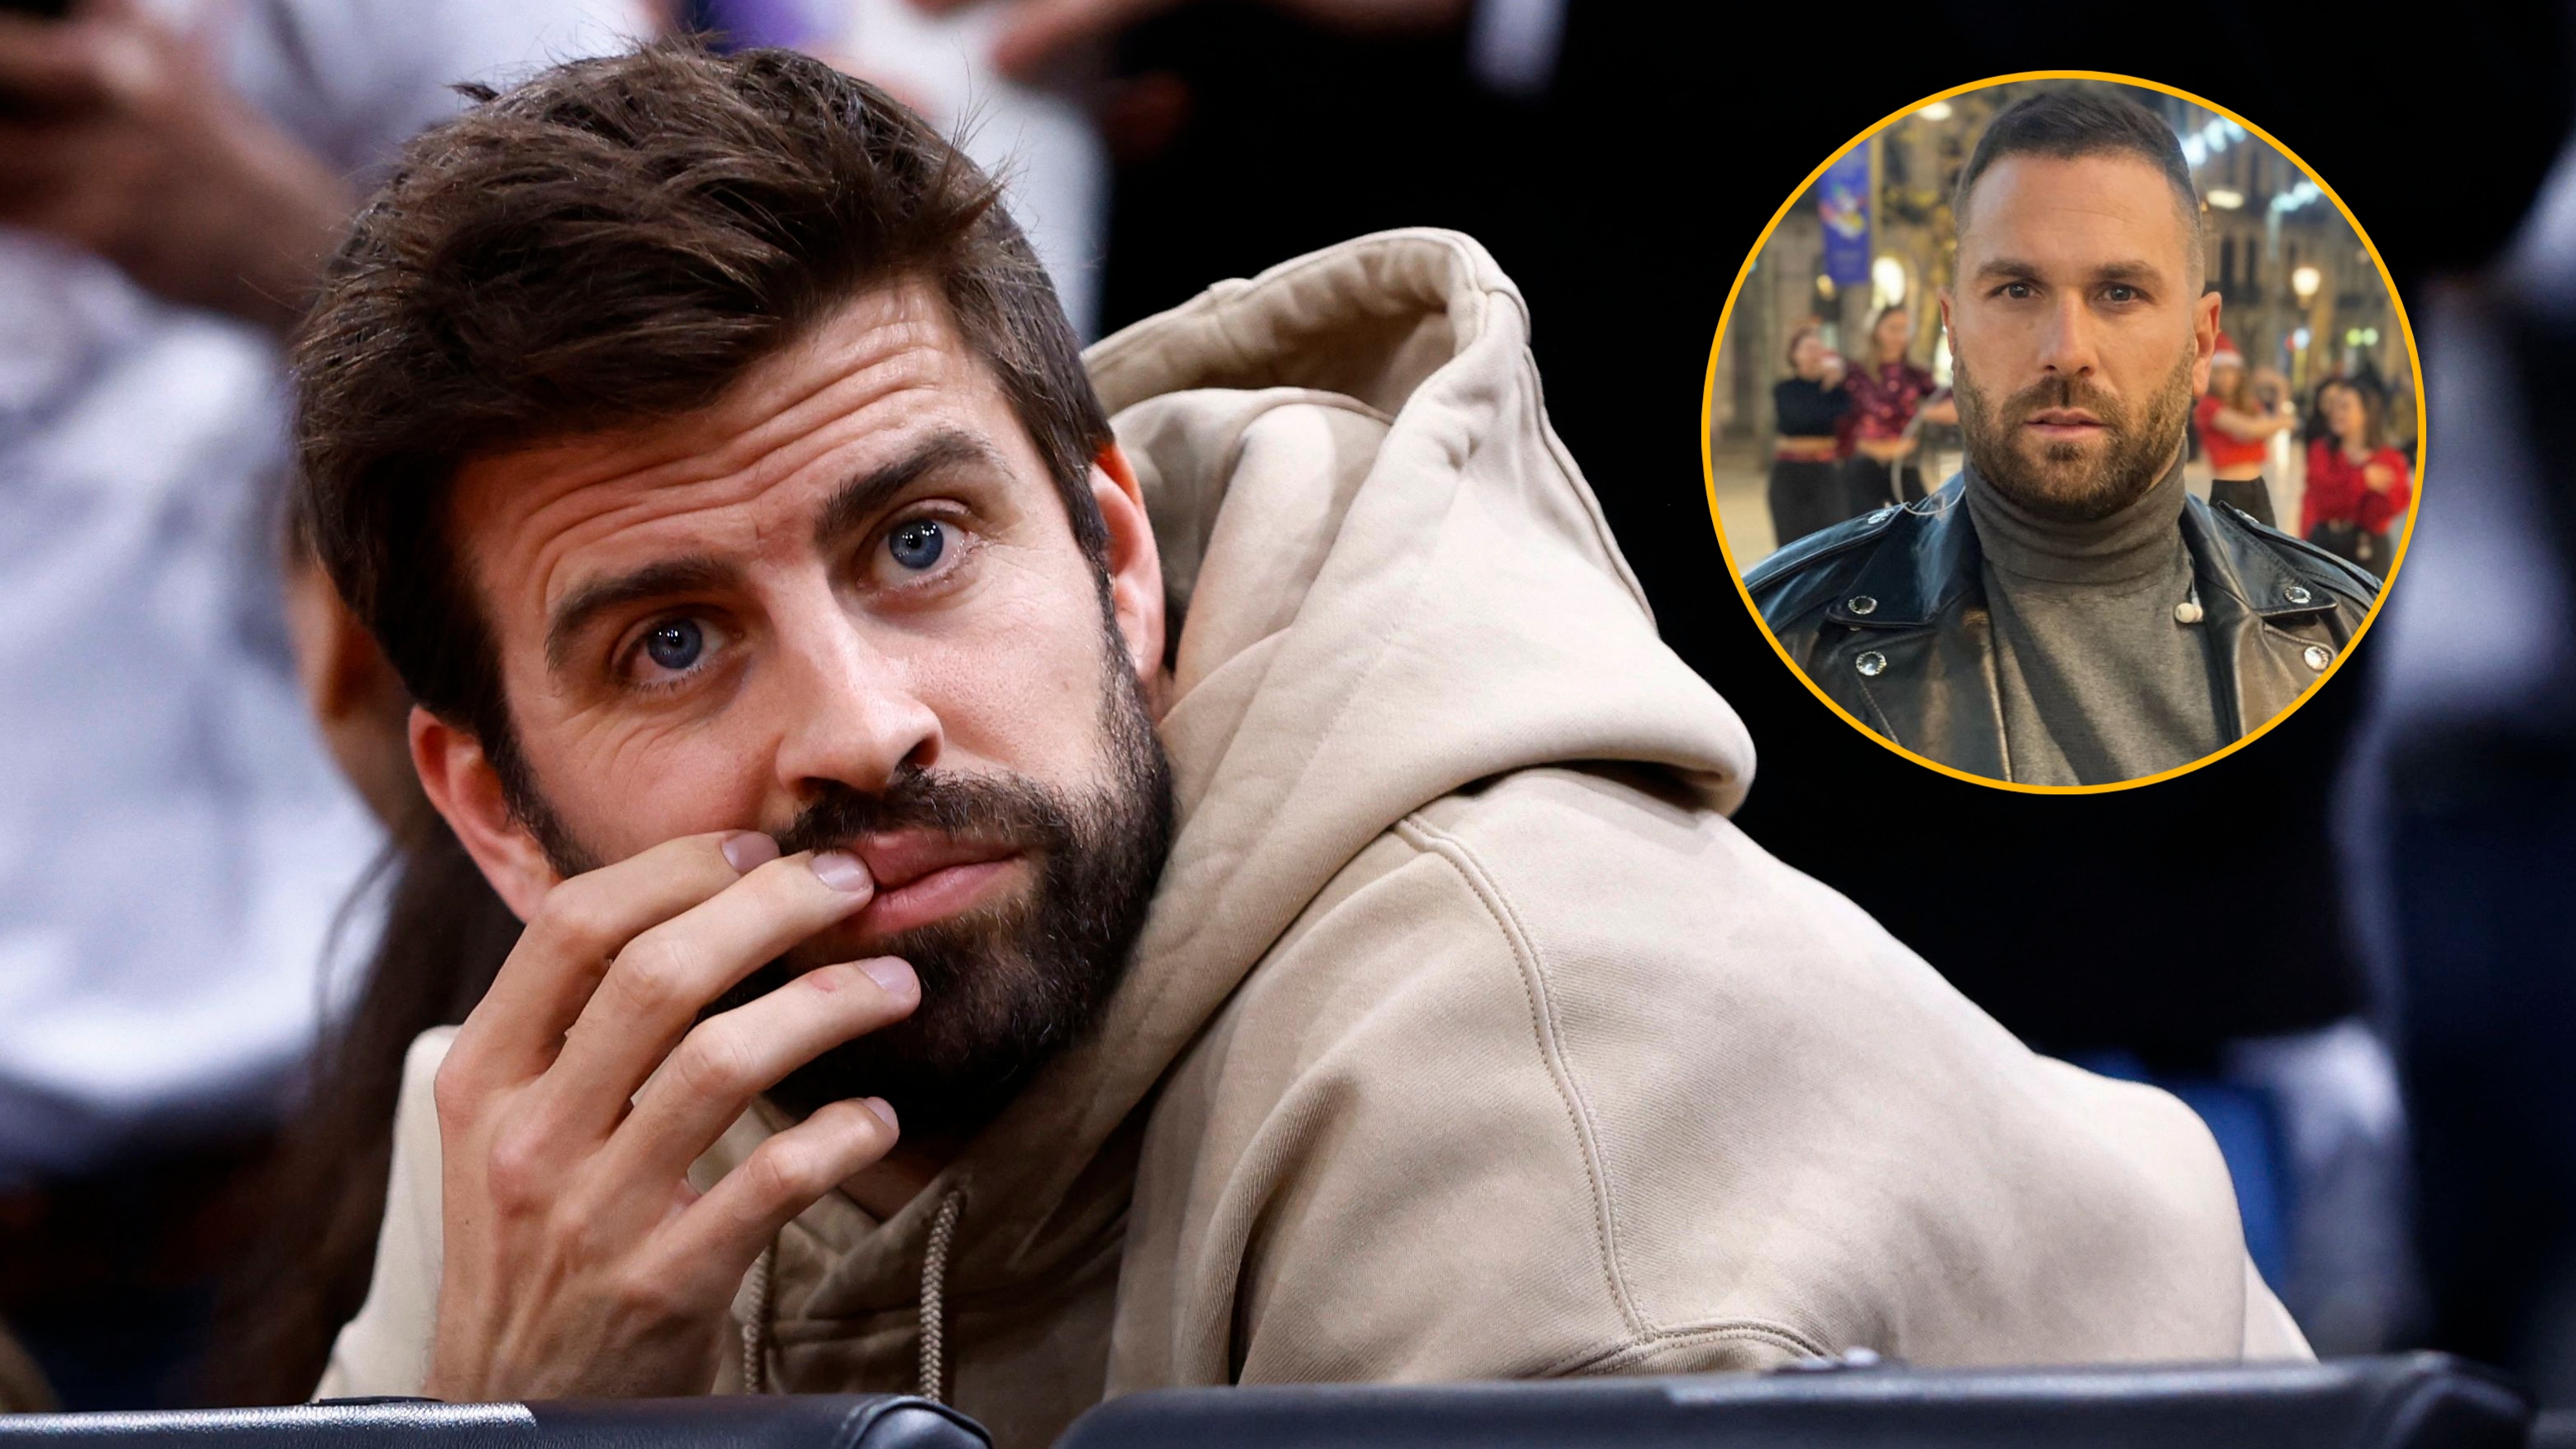 Gerard Piqué reacted to the latest paparazzi revelation about him and recalled his drug problem